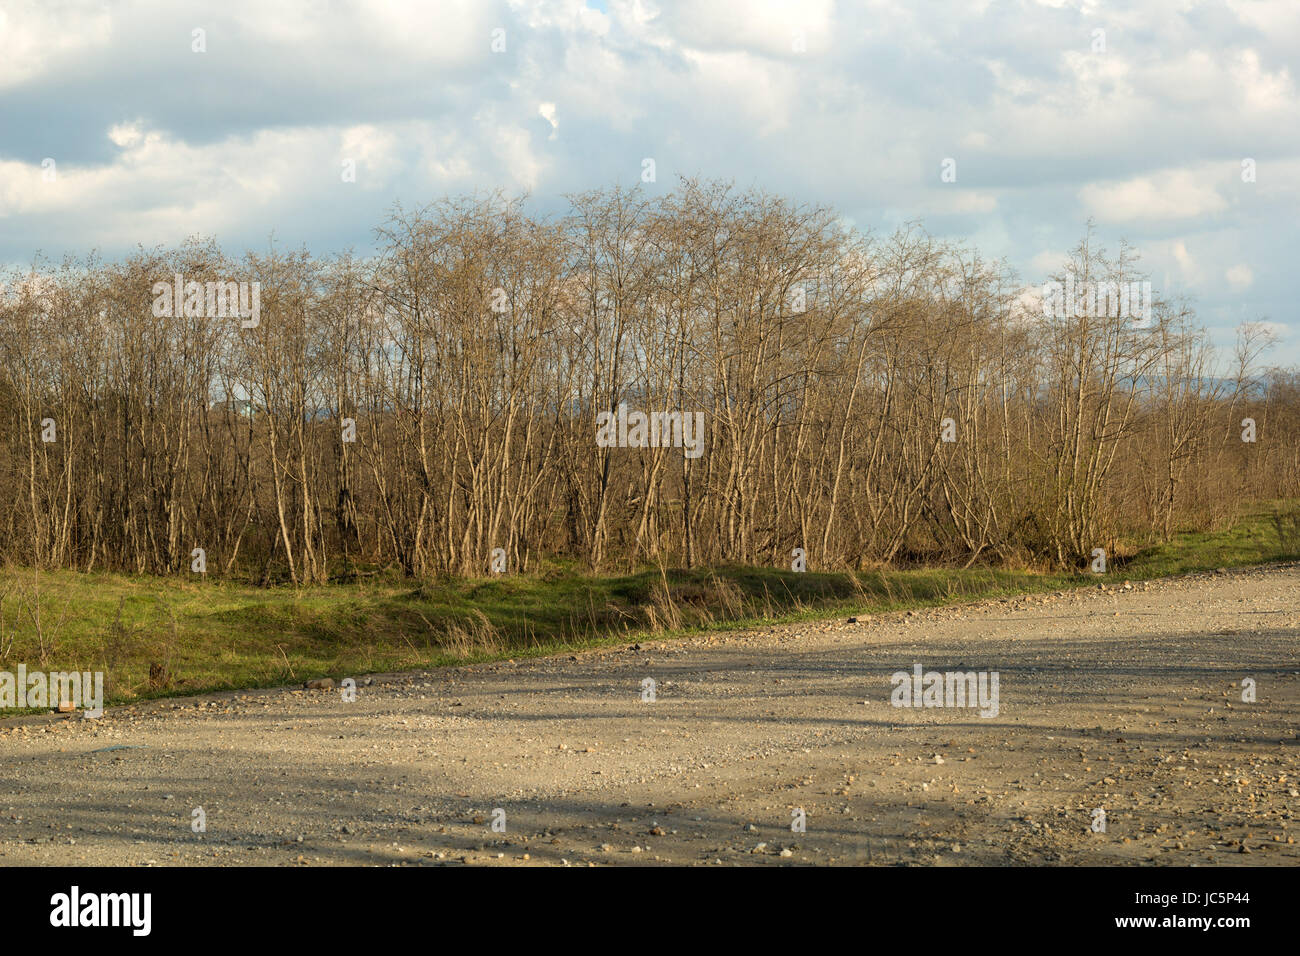 spring landscape with bushes without leaves and a rural road Stock Photo